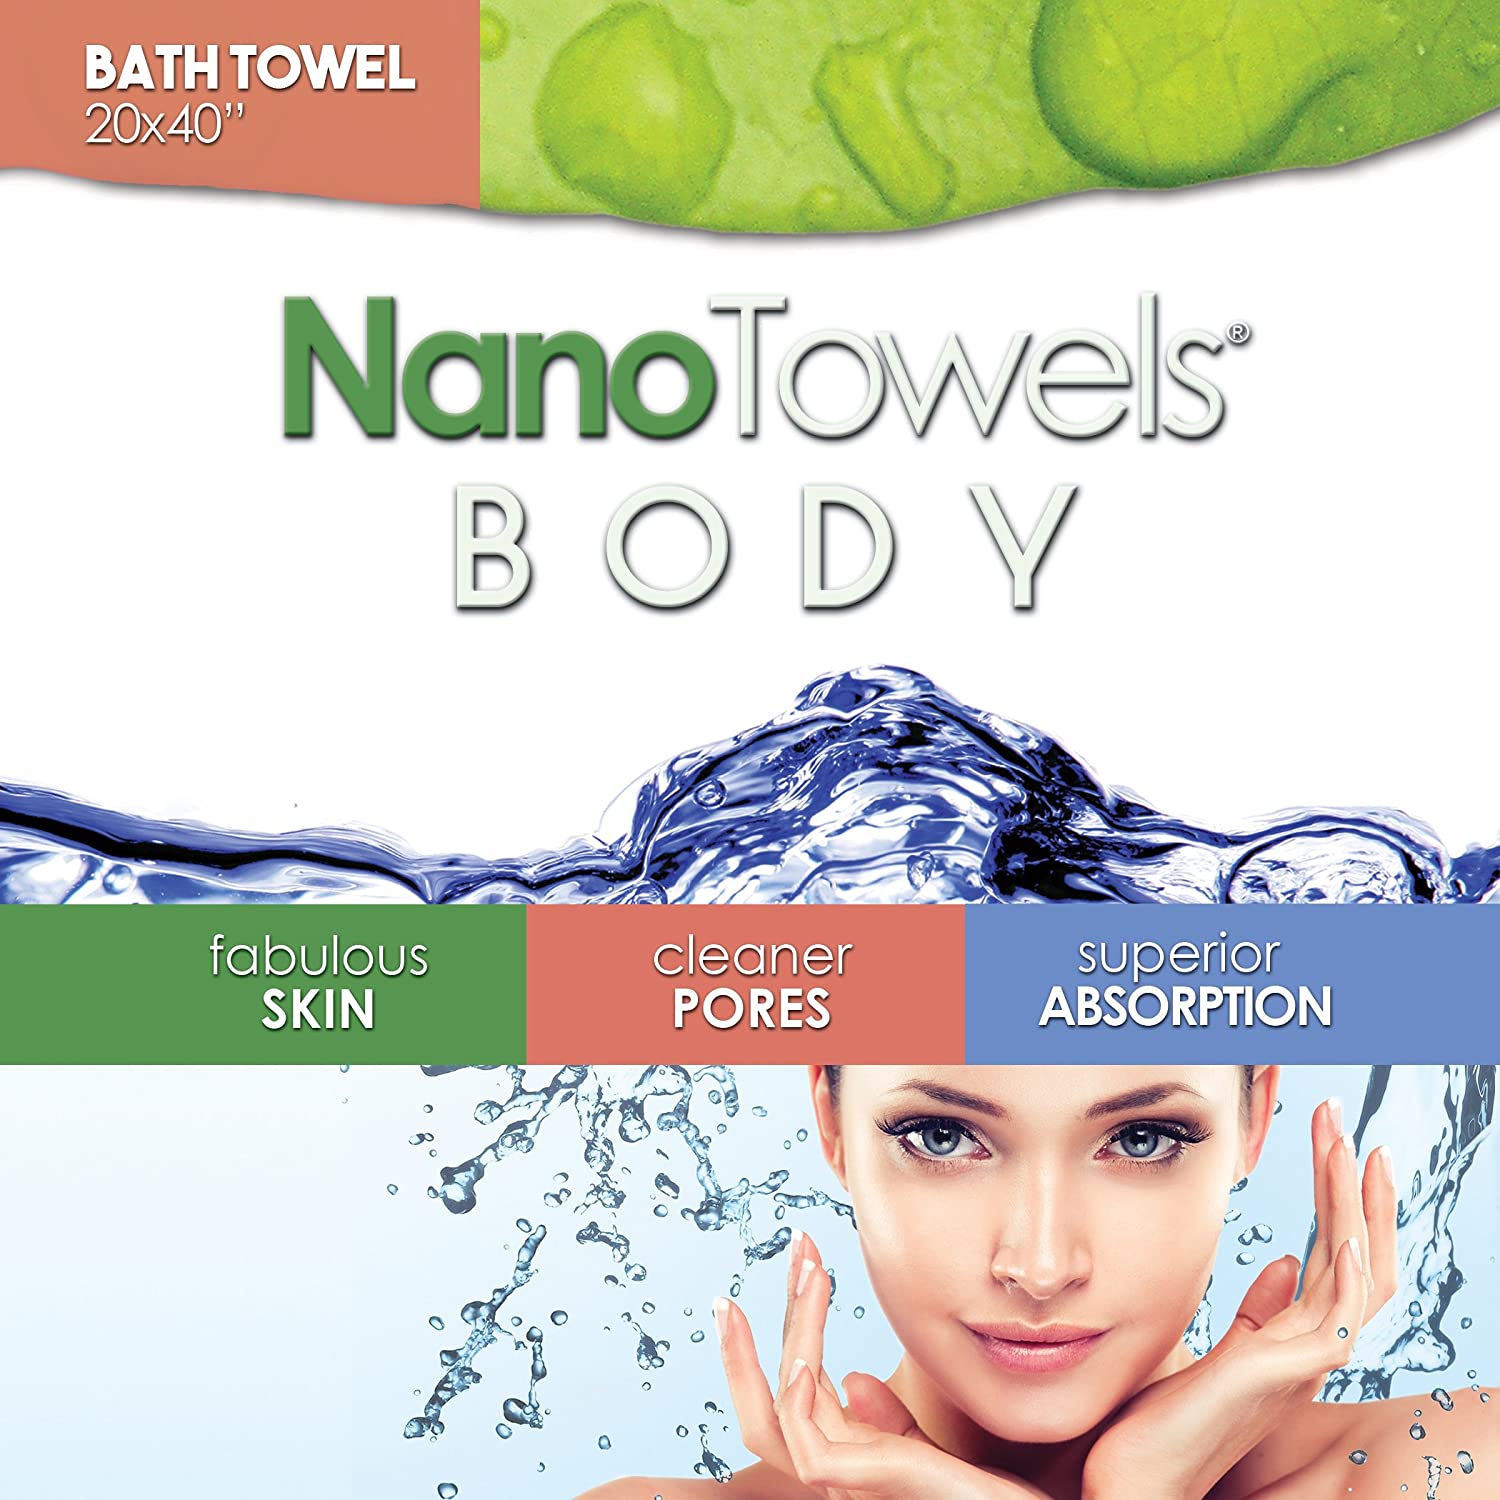 Nano Towels Body Bath & Shower Hair Towel 20x40 White - Super Absorbent. Wipes Away Dirt, Oil and Cosmetics. Use As Your Sports, Travel, Fitness, Kids, Beauty, Spa or Solon Luxury Towel - image 2 of 4